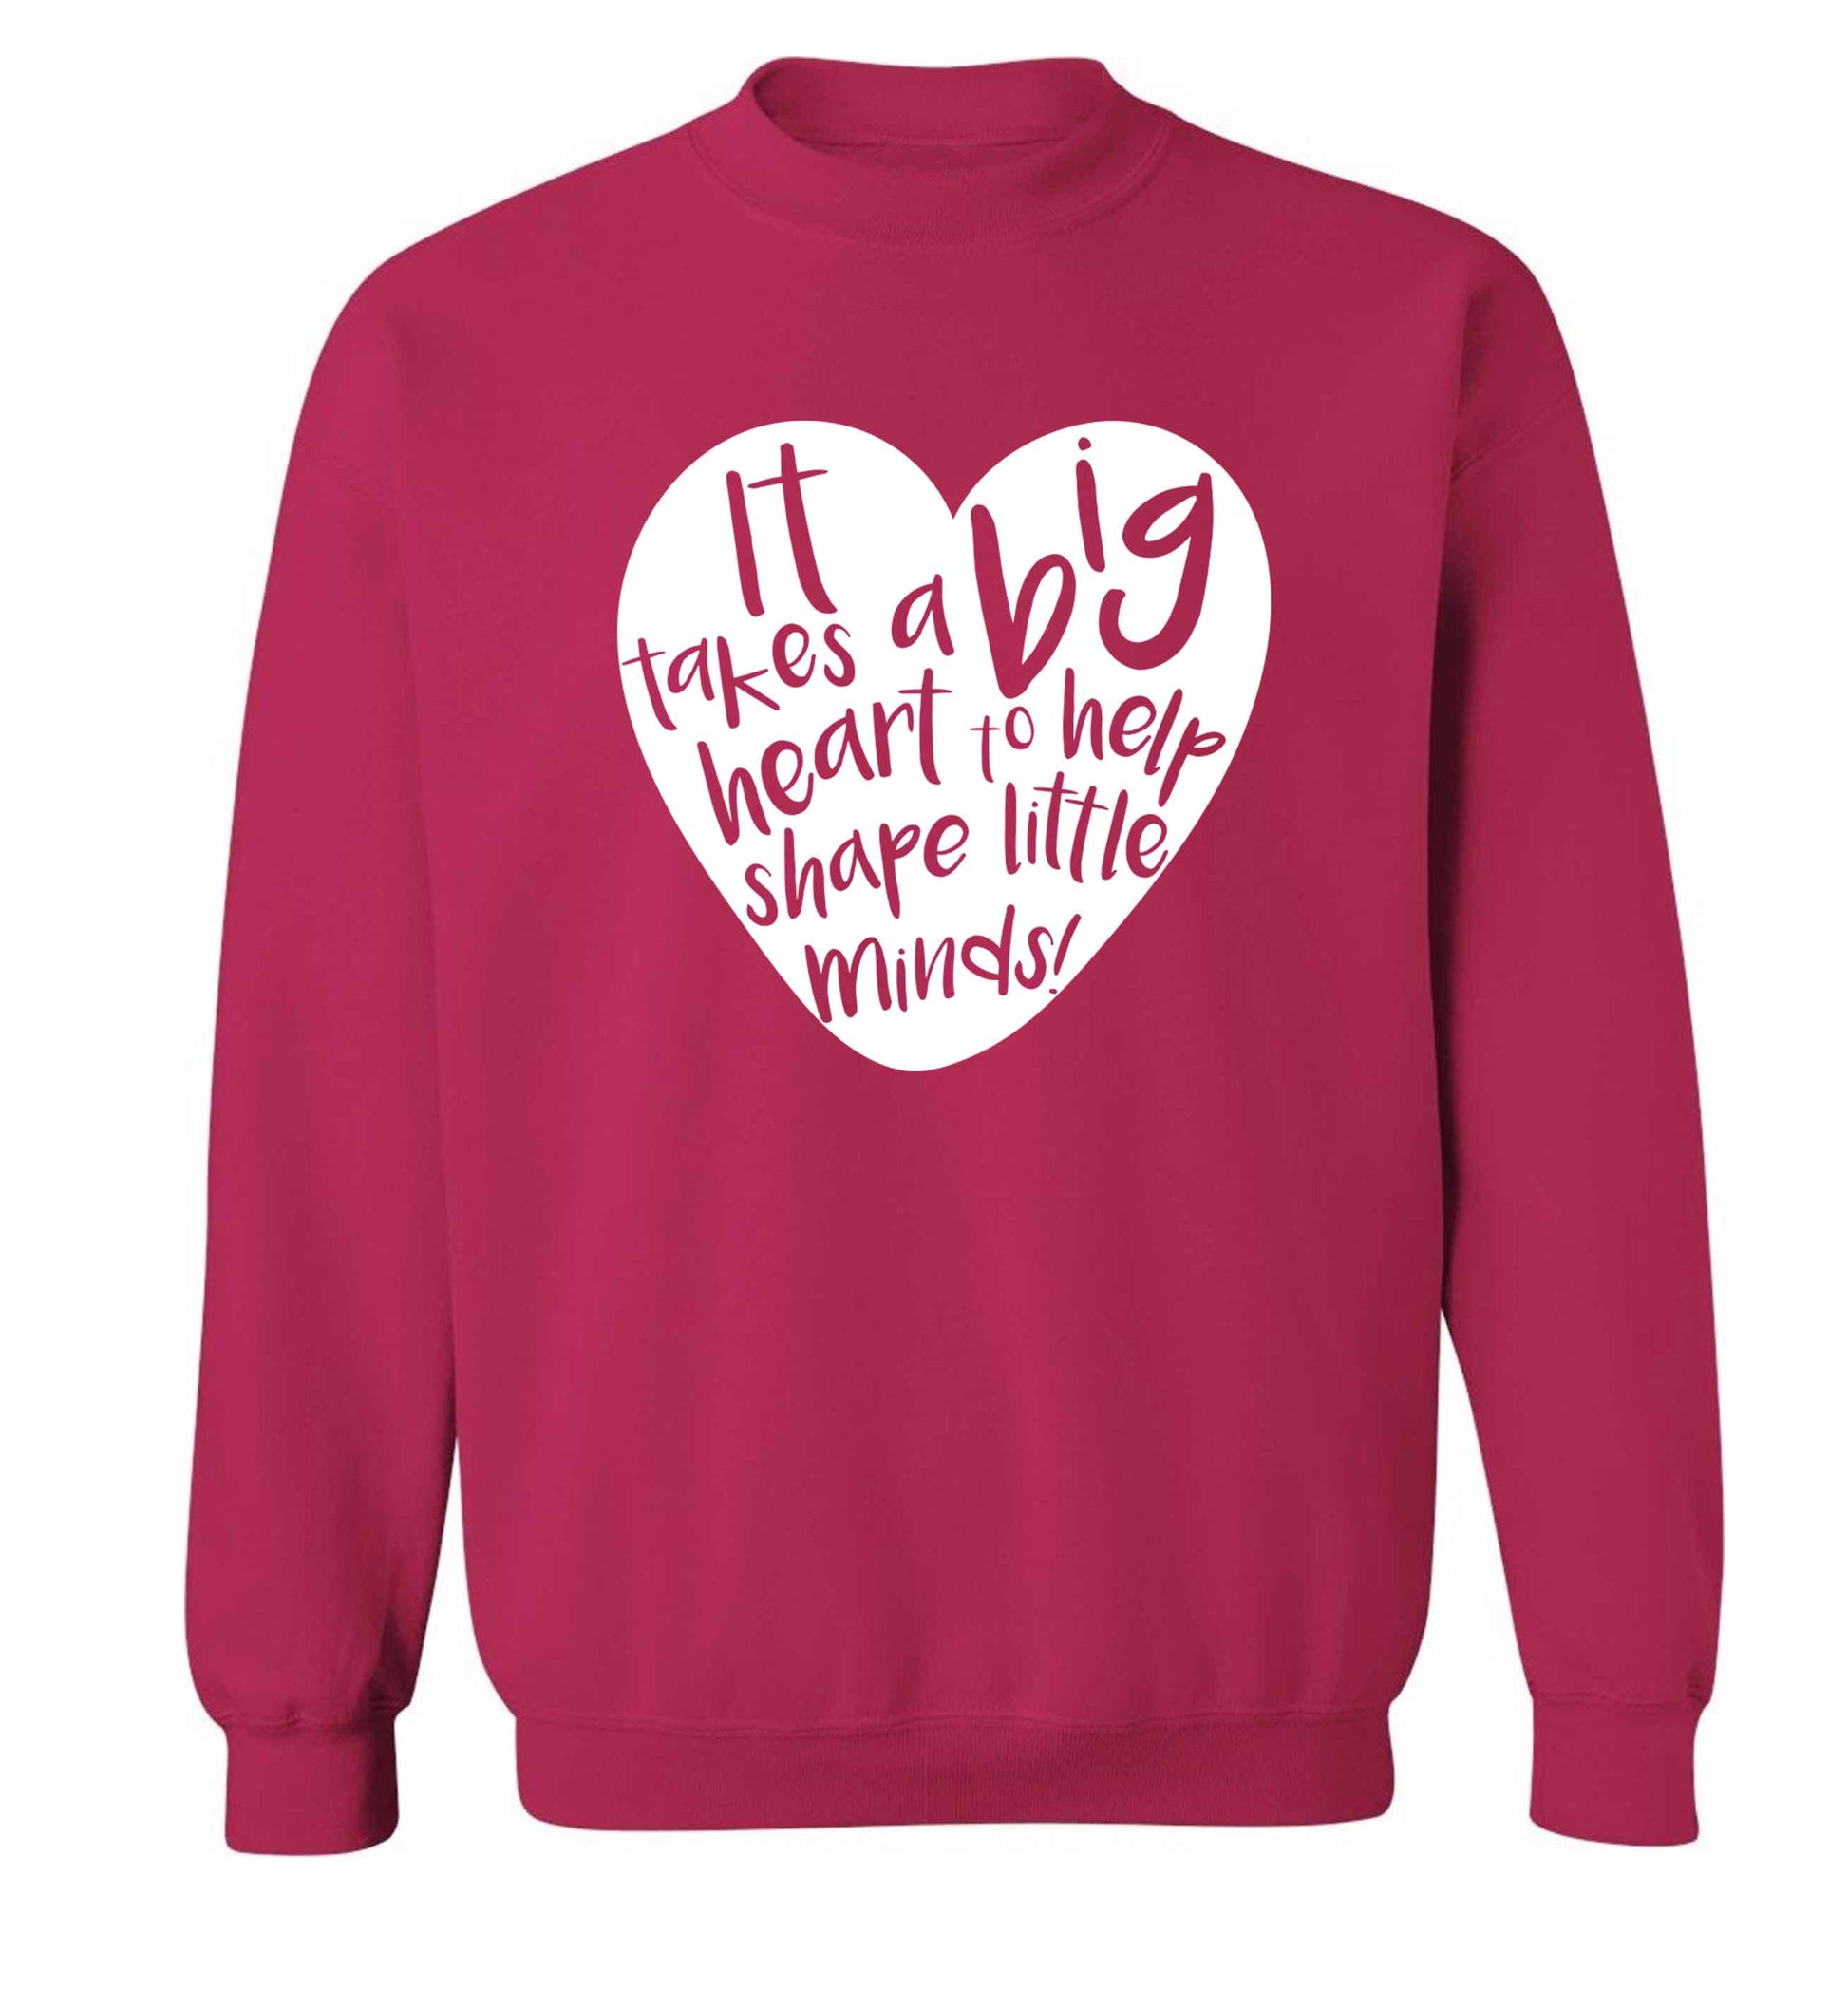 It takes a big heart to help shape little minds adult's unisex pink sweater 2XL